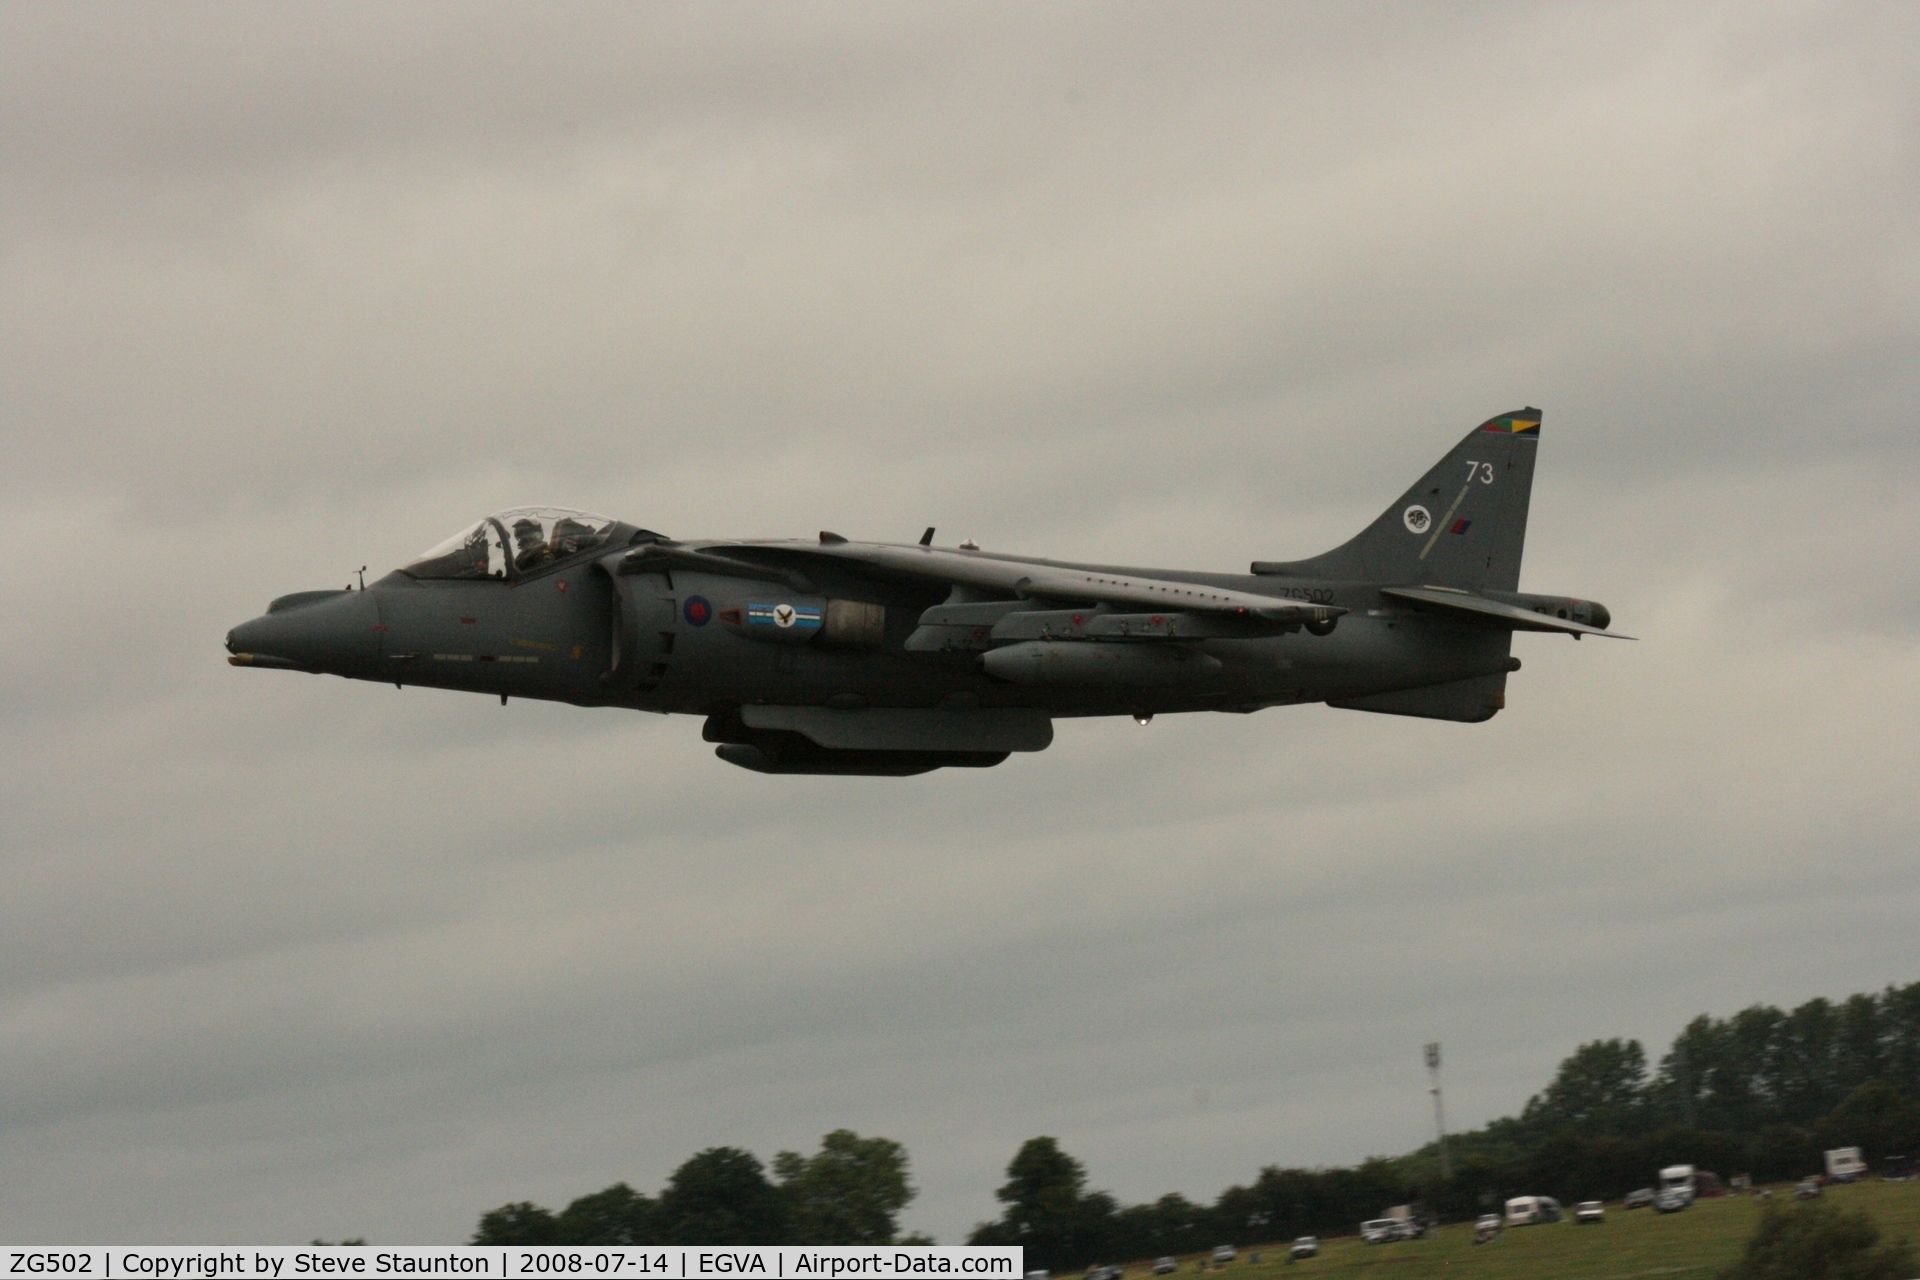 ZG502, 1990 British Aerospace Harrier GR.7 C/N P73, Taken at the Royal International Air Tattoo 2008 during arrivals and departures (show days cancelled due to bad weather)